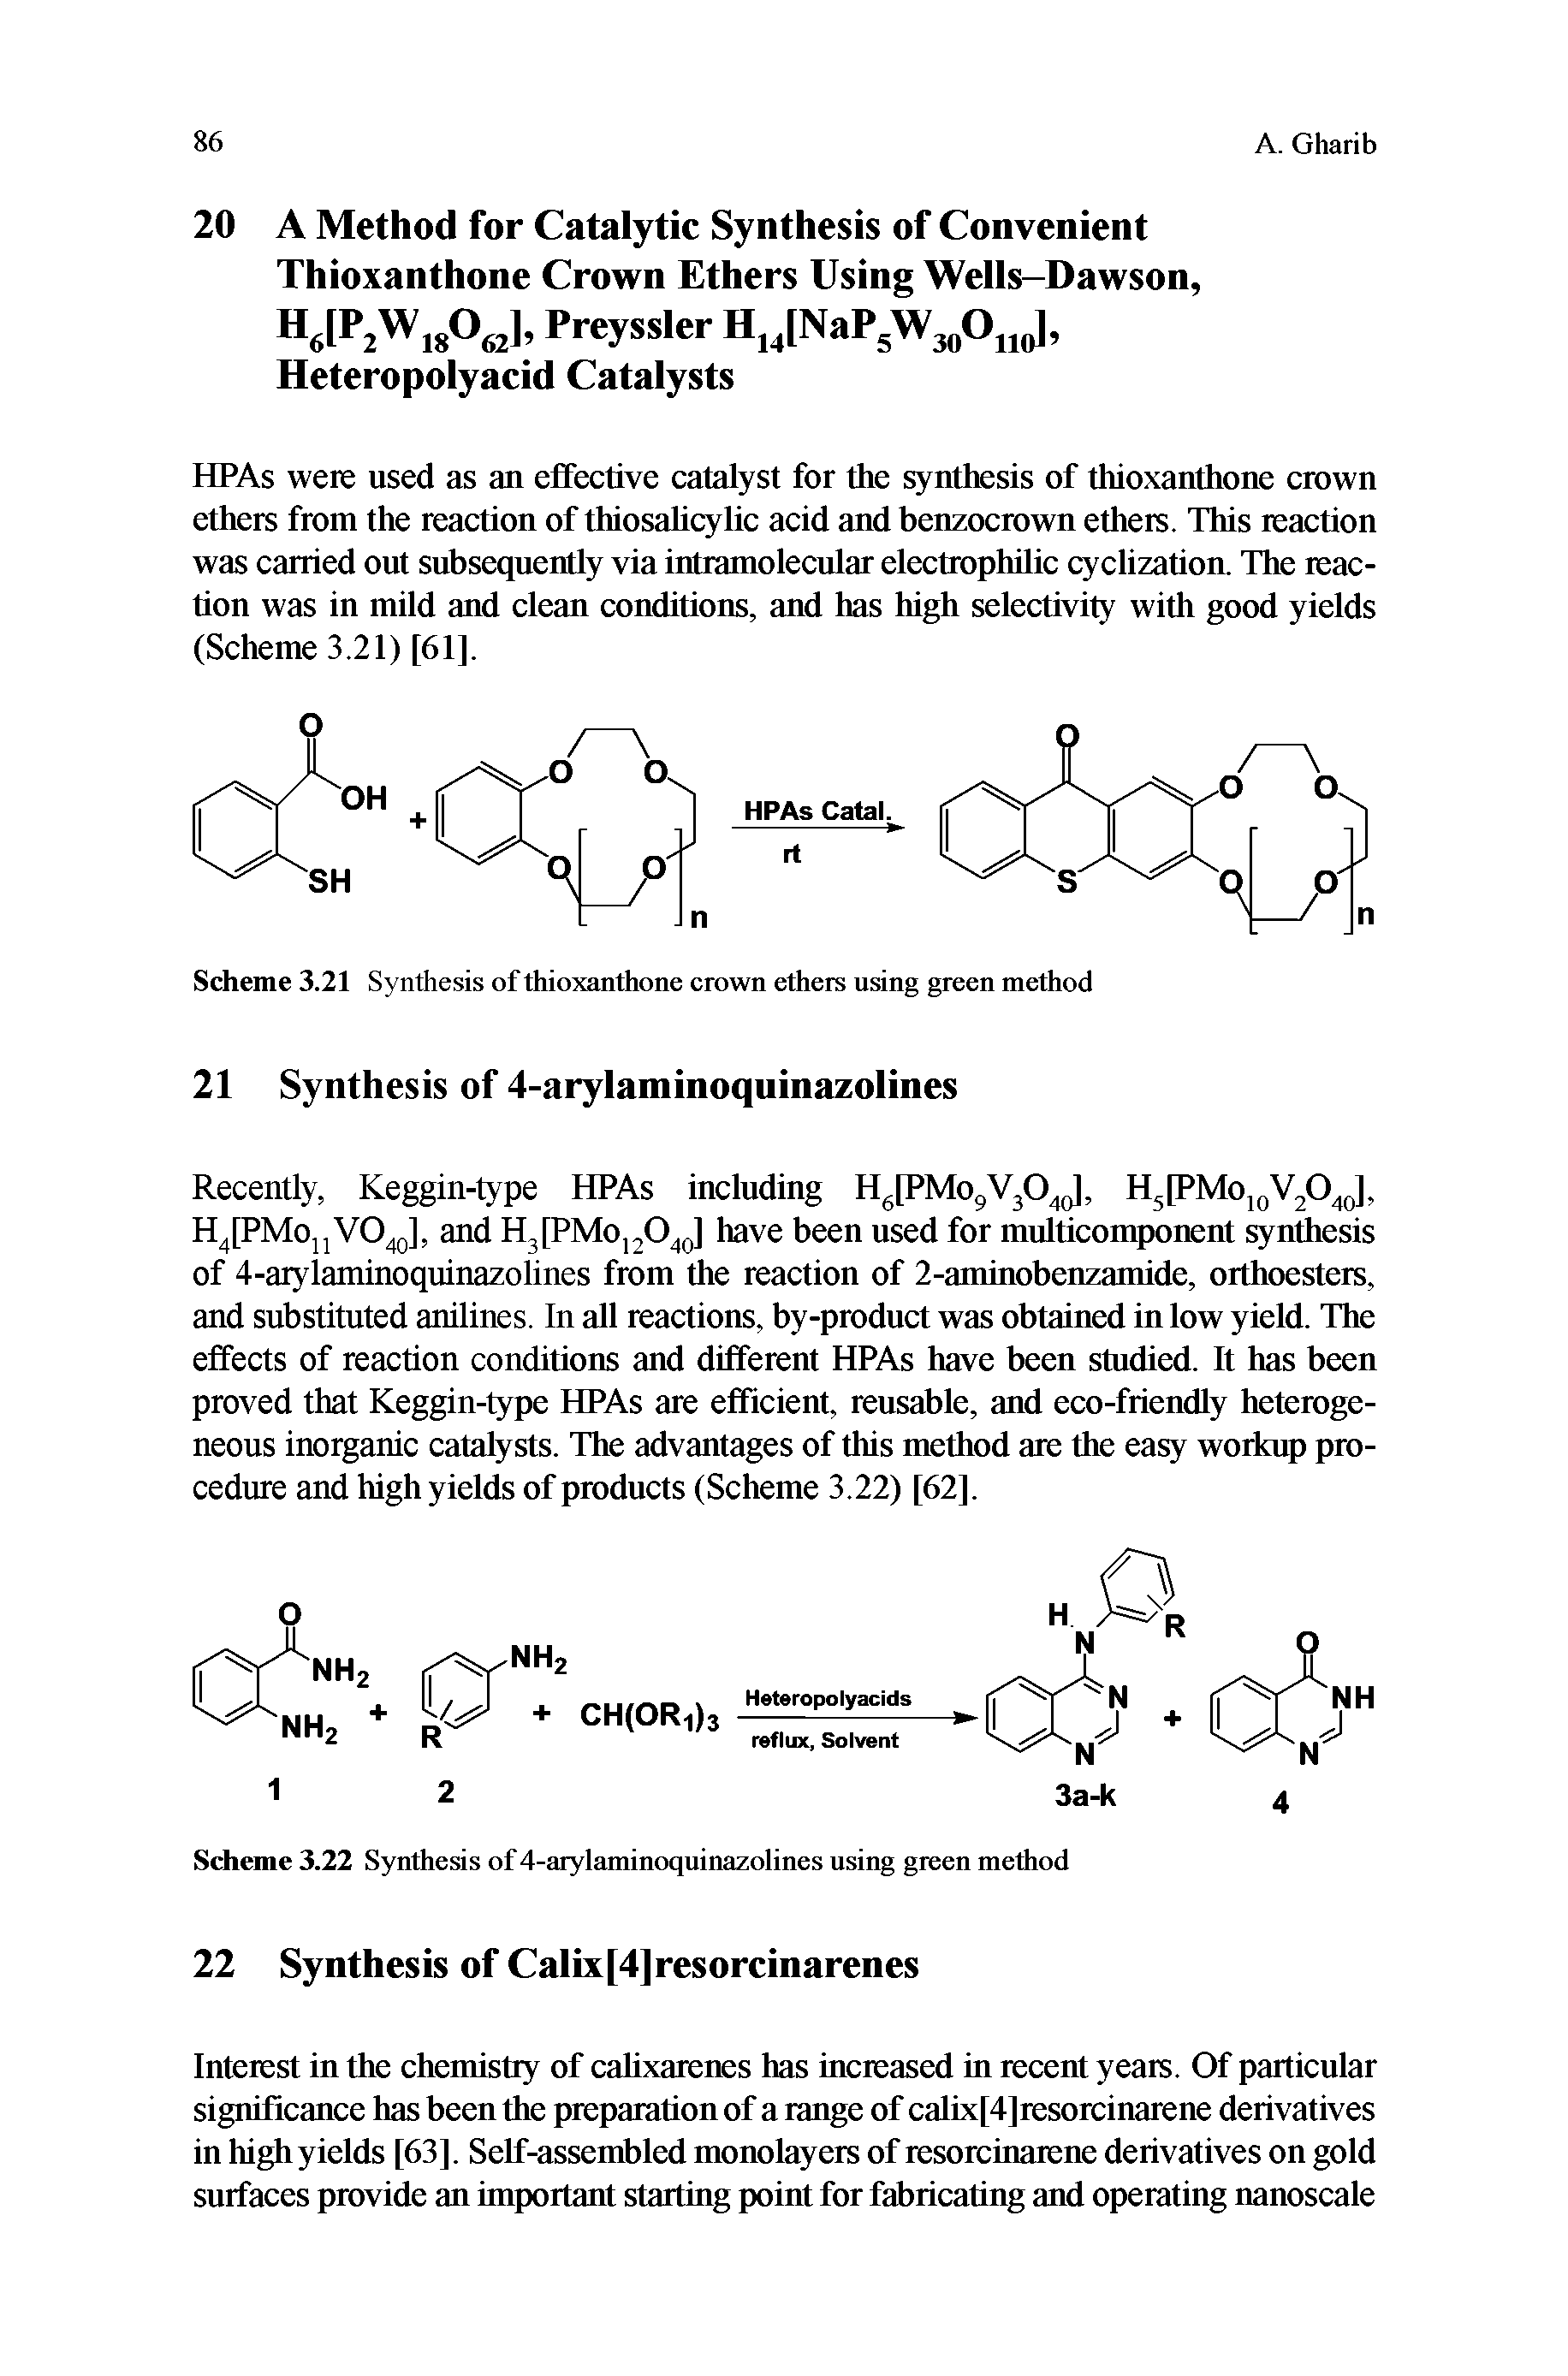 Scheme 3.21 Synthesis of thioxanthone crown ethers using green method...